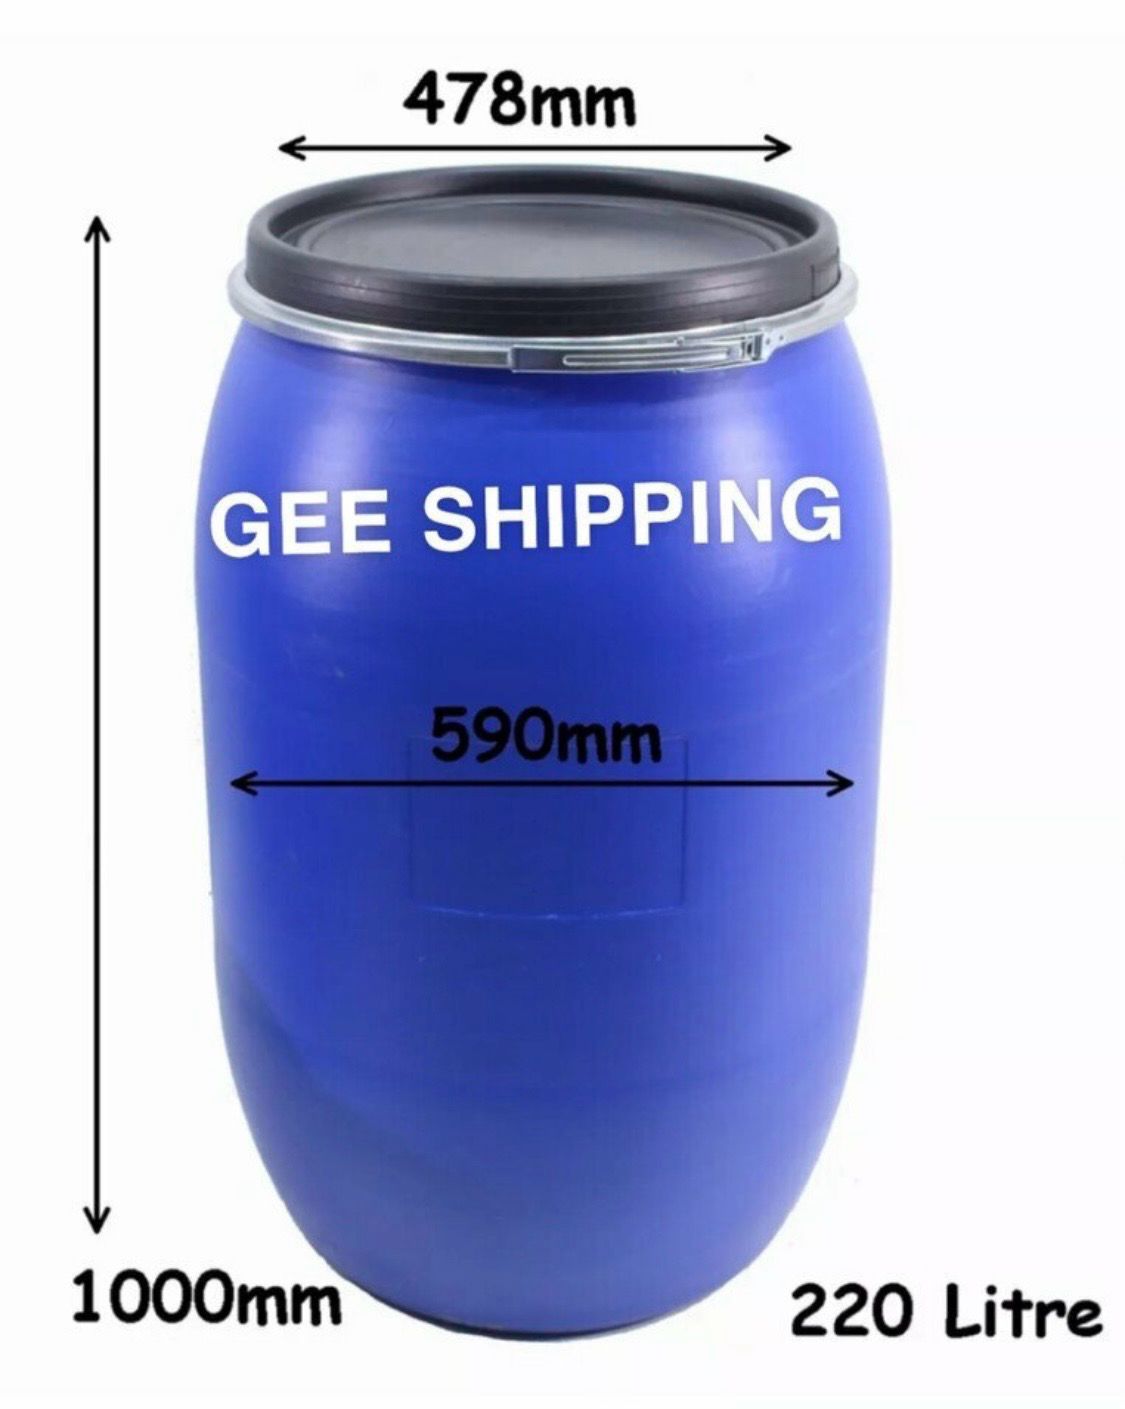 Buy (1) Brand-New 220 L Ltr Litre Plastic Blue Open Top Keg Drum Barrel for Storage Food Grade with Lid UN Approved Shipping Food Cooking